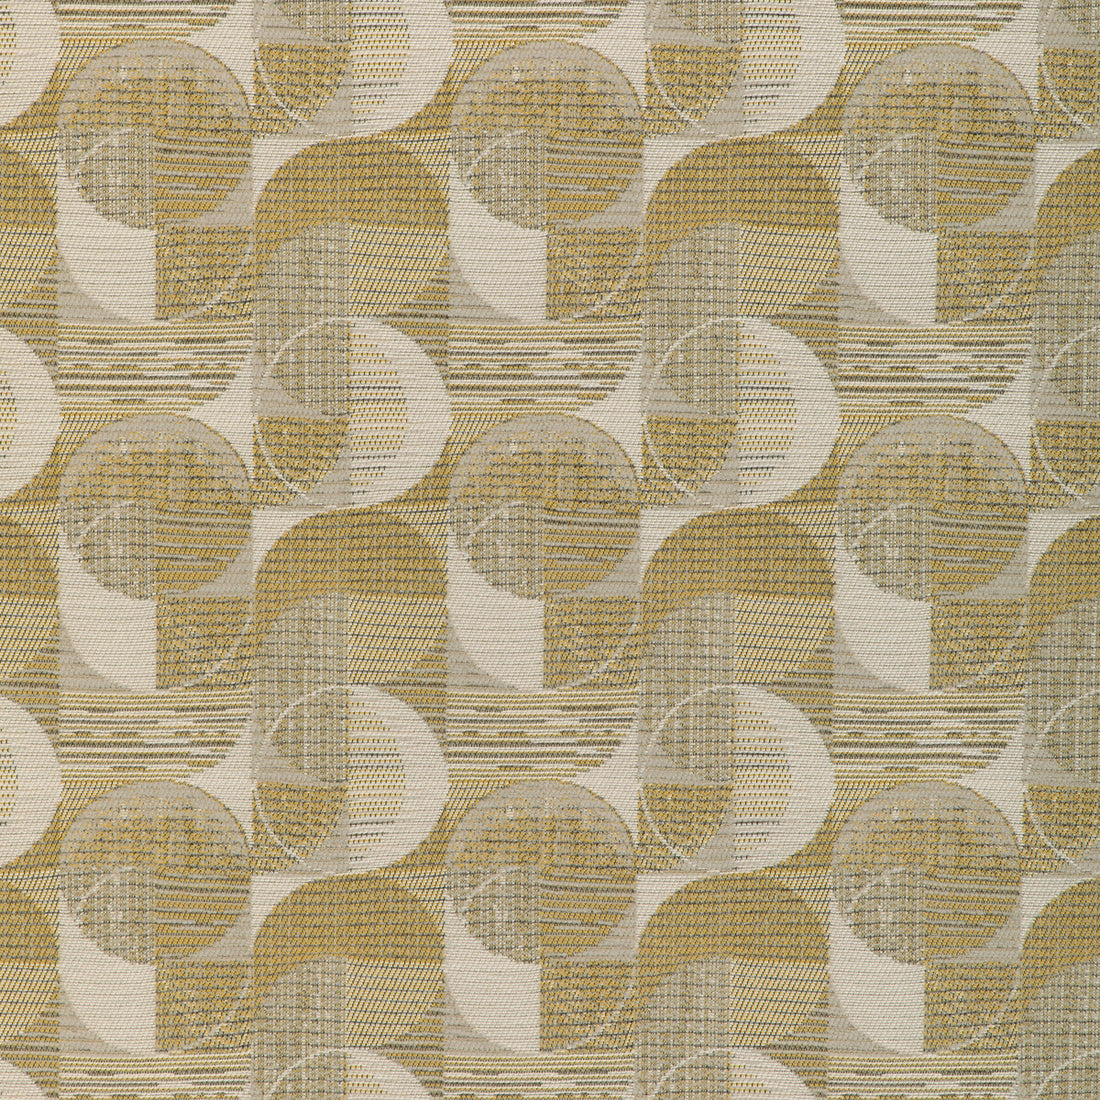 Daybreak fabric in lemongrass color - pattern 37050.40.0 - by Kravet Contract in the Chesapeake collection